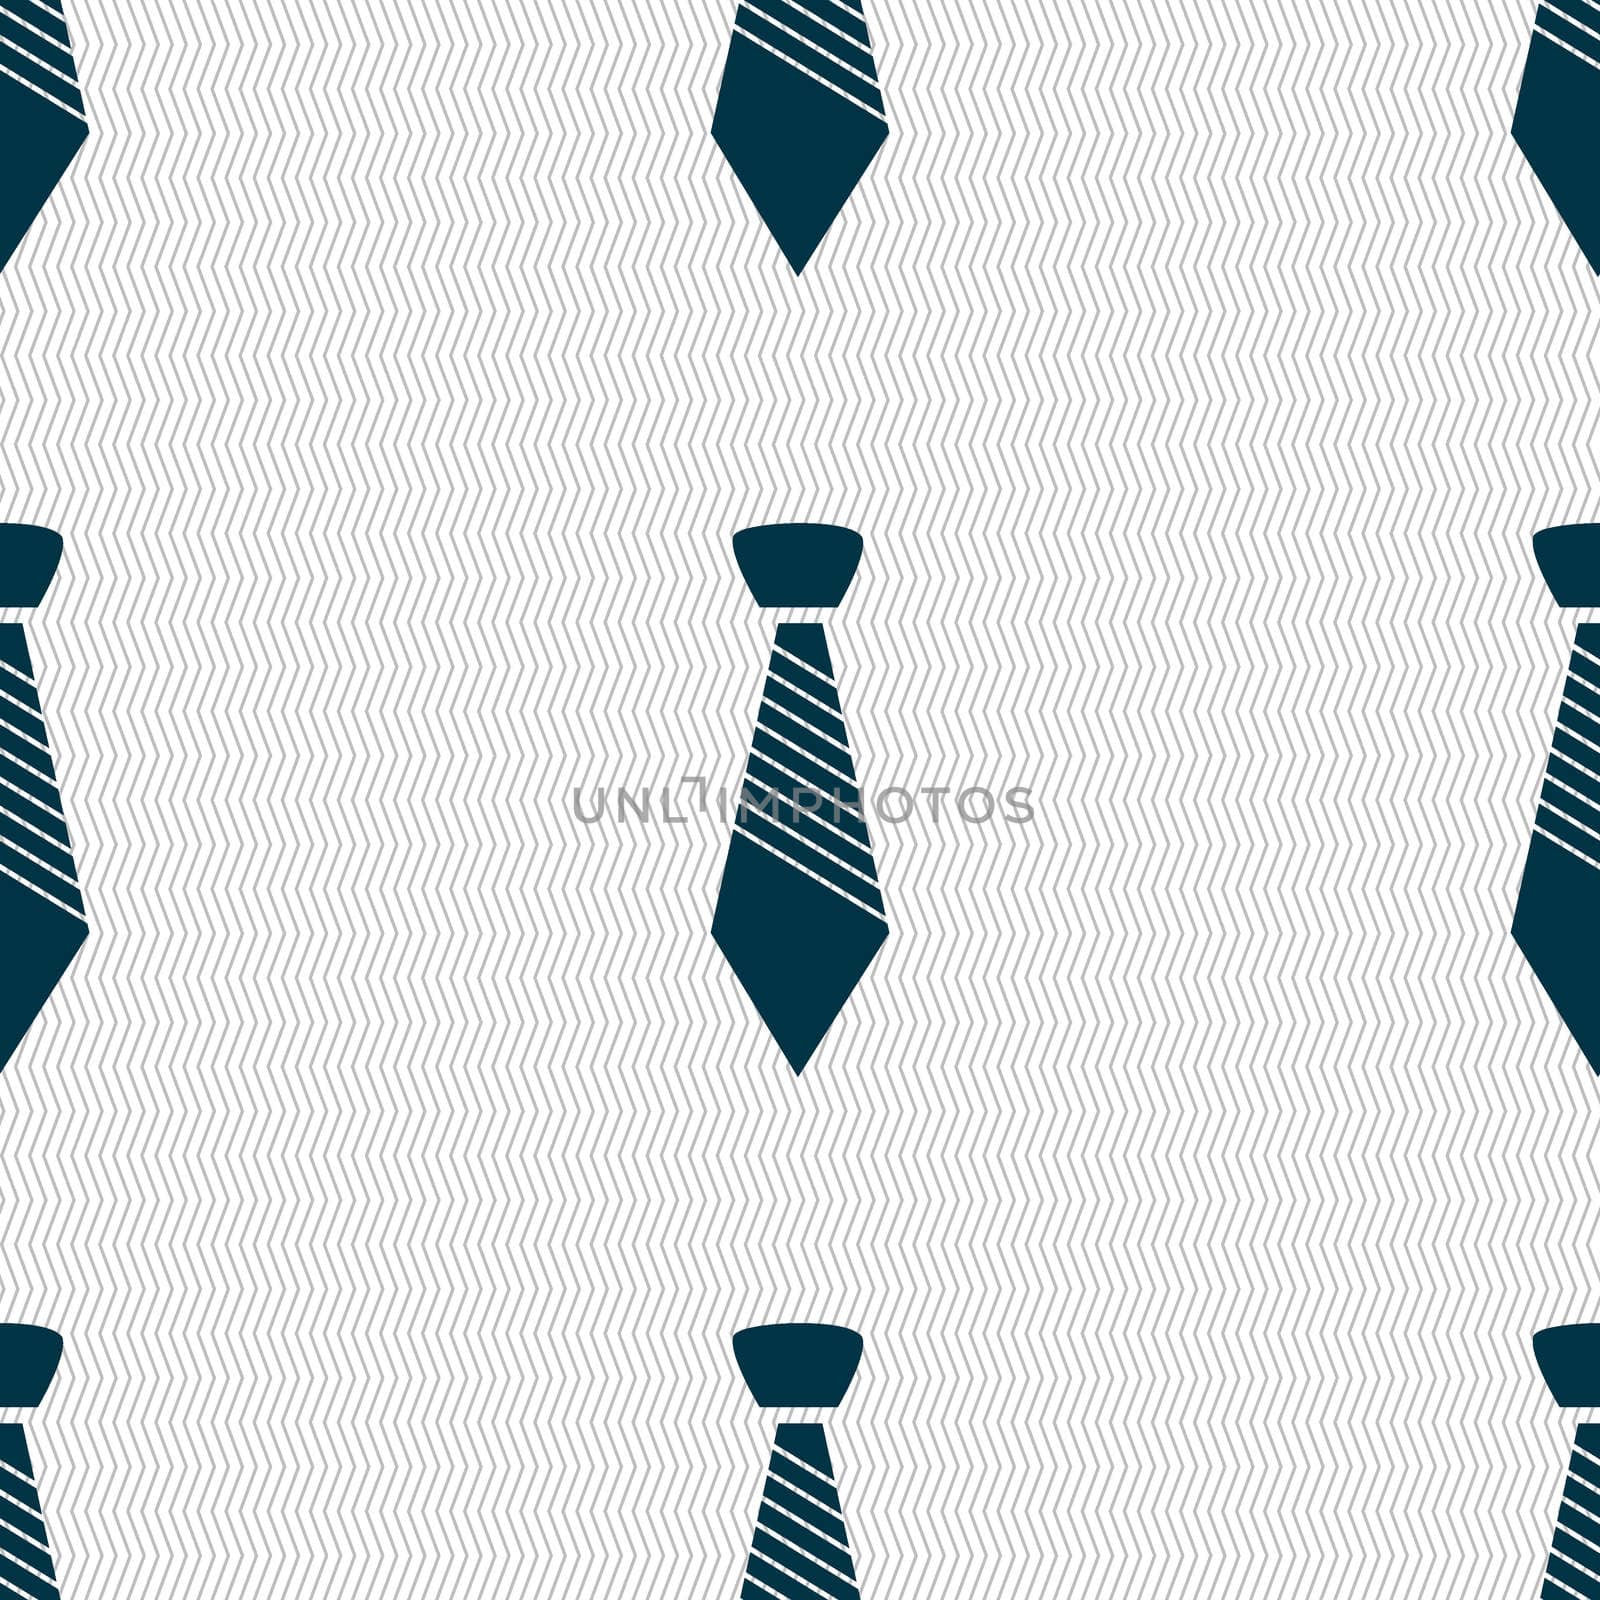 Tie sign icon. Business clothes symbol. Seamless abstract background with geometric shapes.  by serhii_lohvyniuk